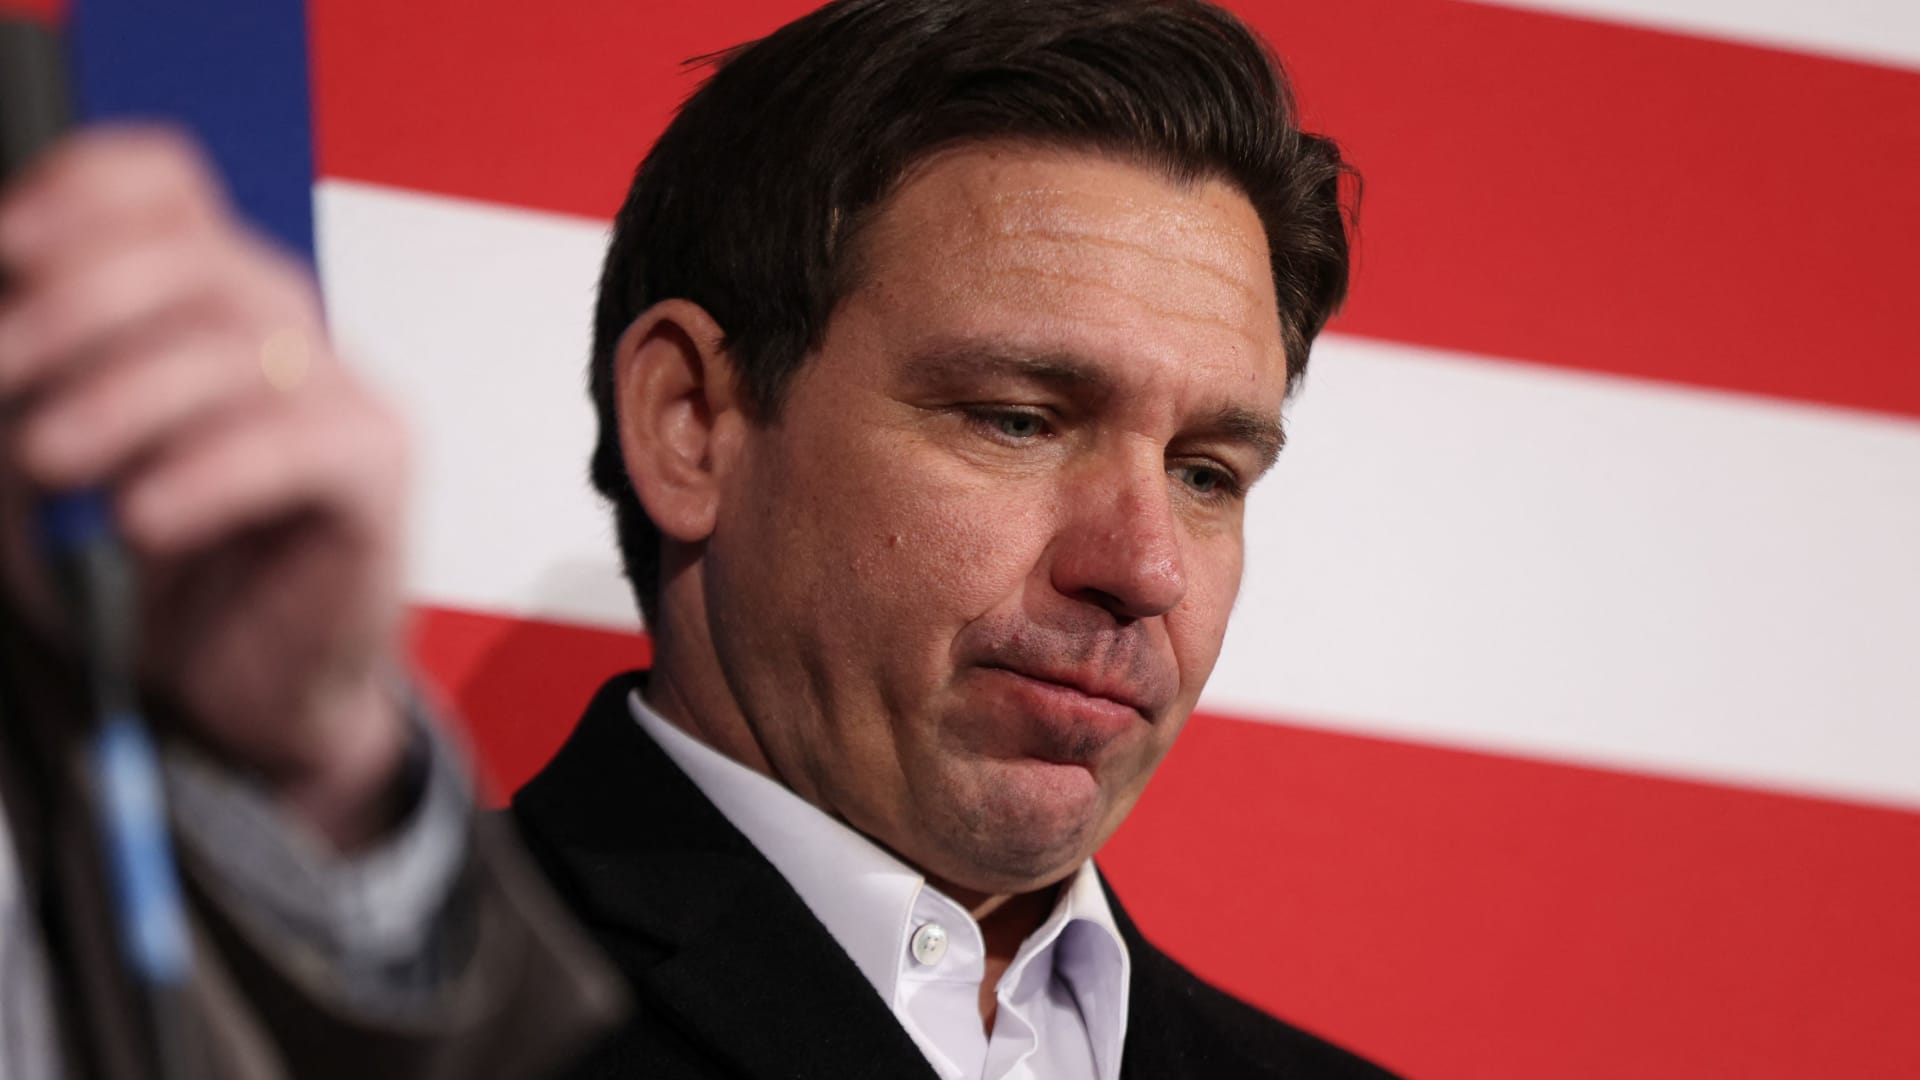 Republican presidential candidate and Florida Governor Ron DeSantis looks on during a campaign event at the Chrome Horse Saloon ahead of the caucus vote in Cedar Rapids, Iowa, U.S., January 14, 2024. 